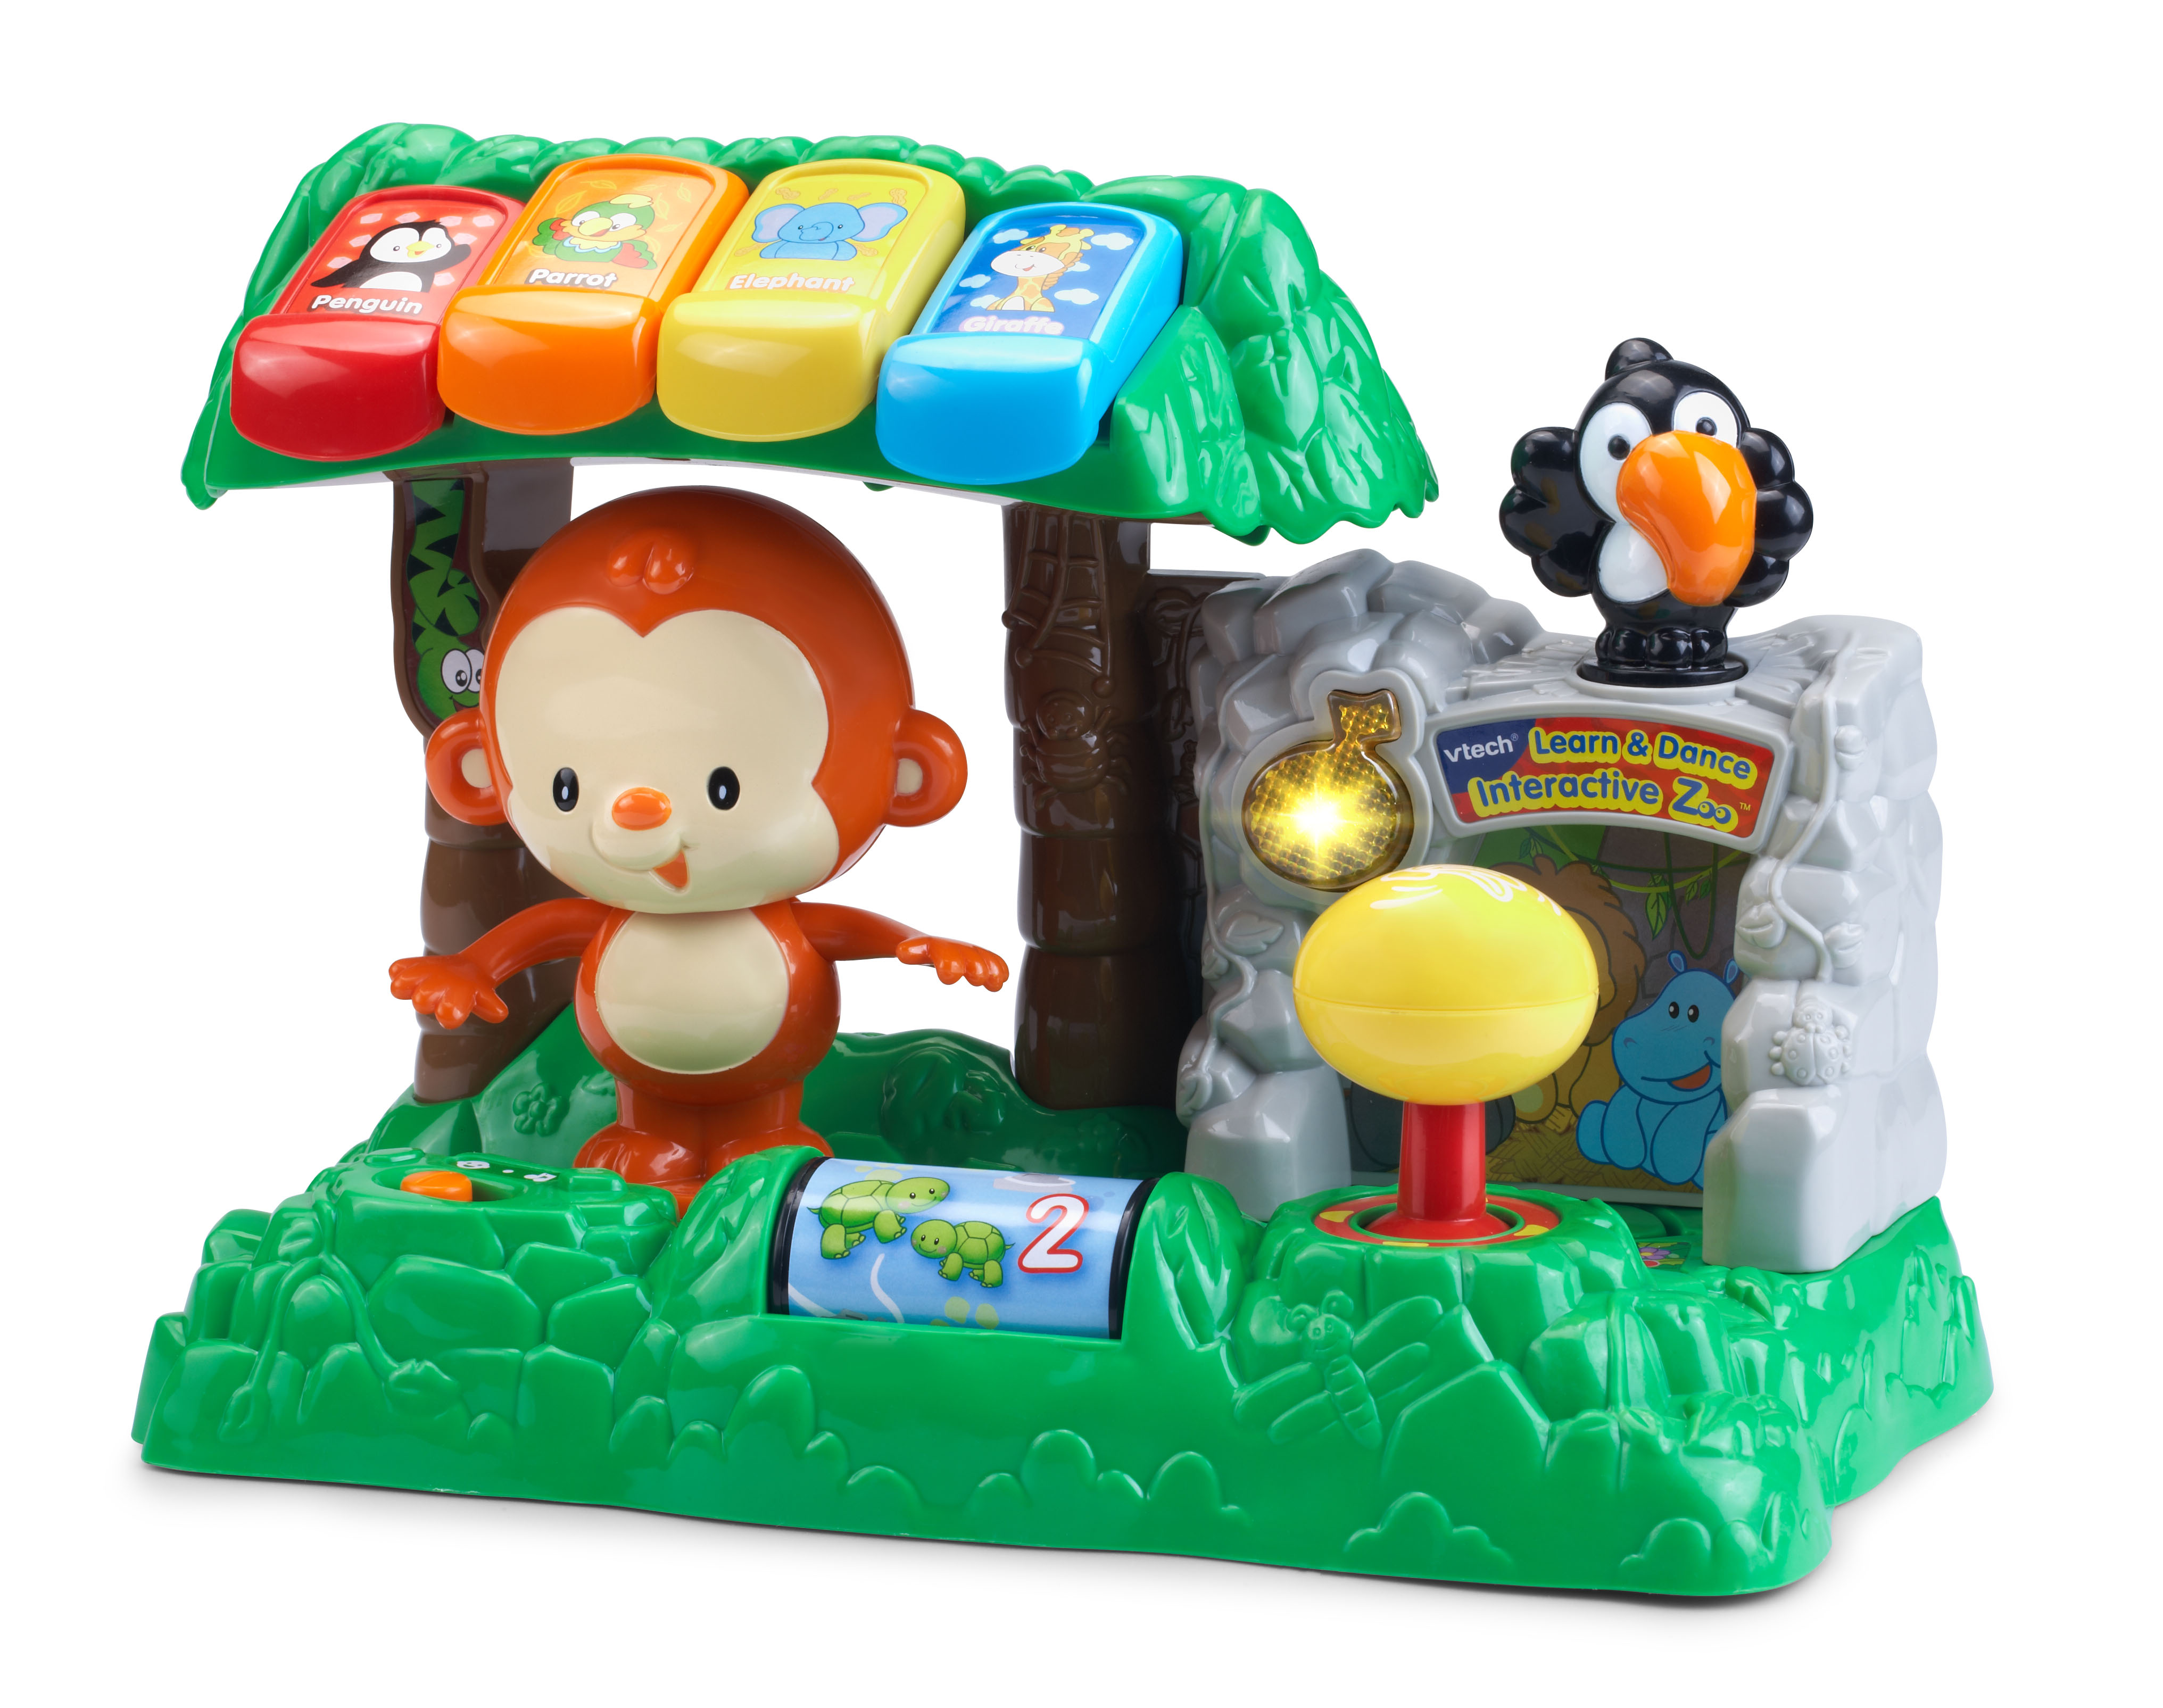 VTech Learn and Dance Interactive Zoo, Fun Teaching Toy for Toddlers - image 5 of 6